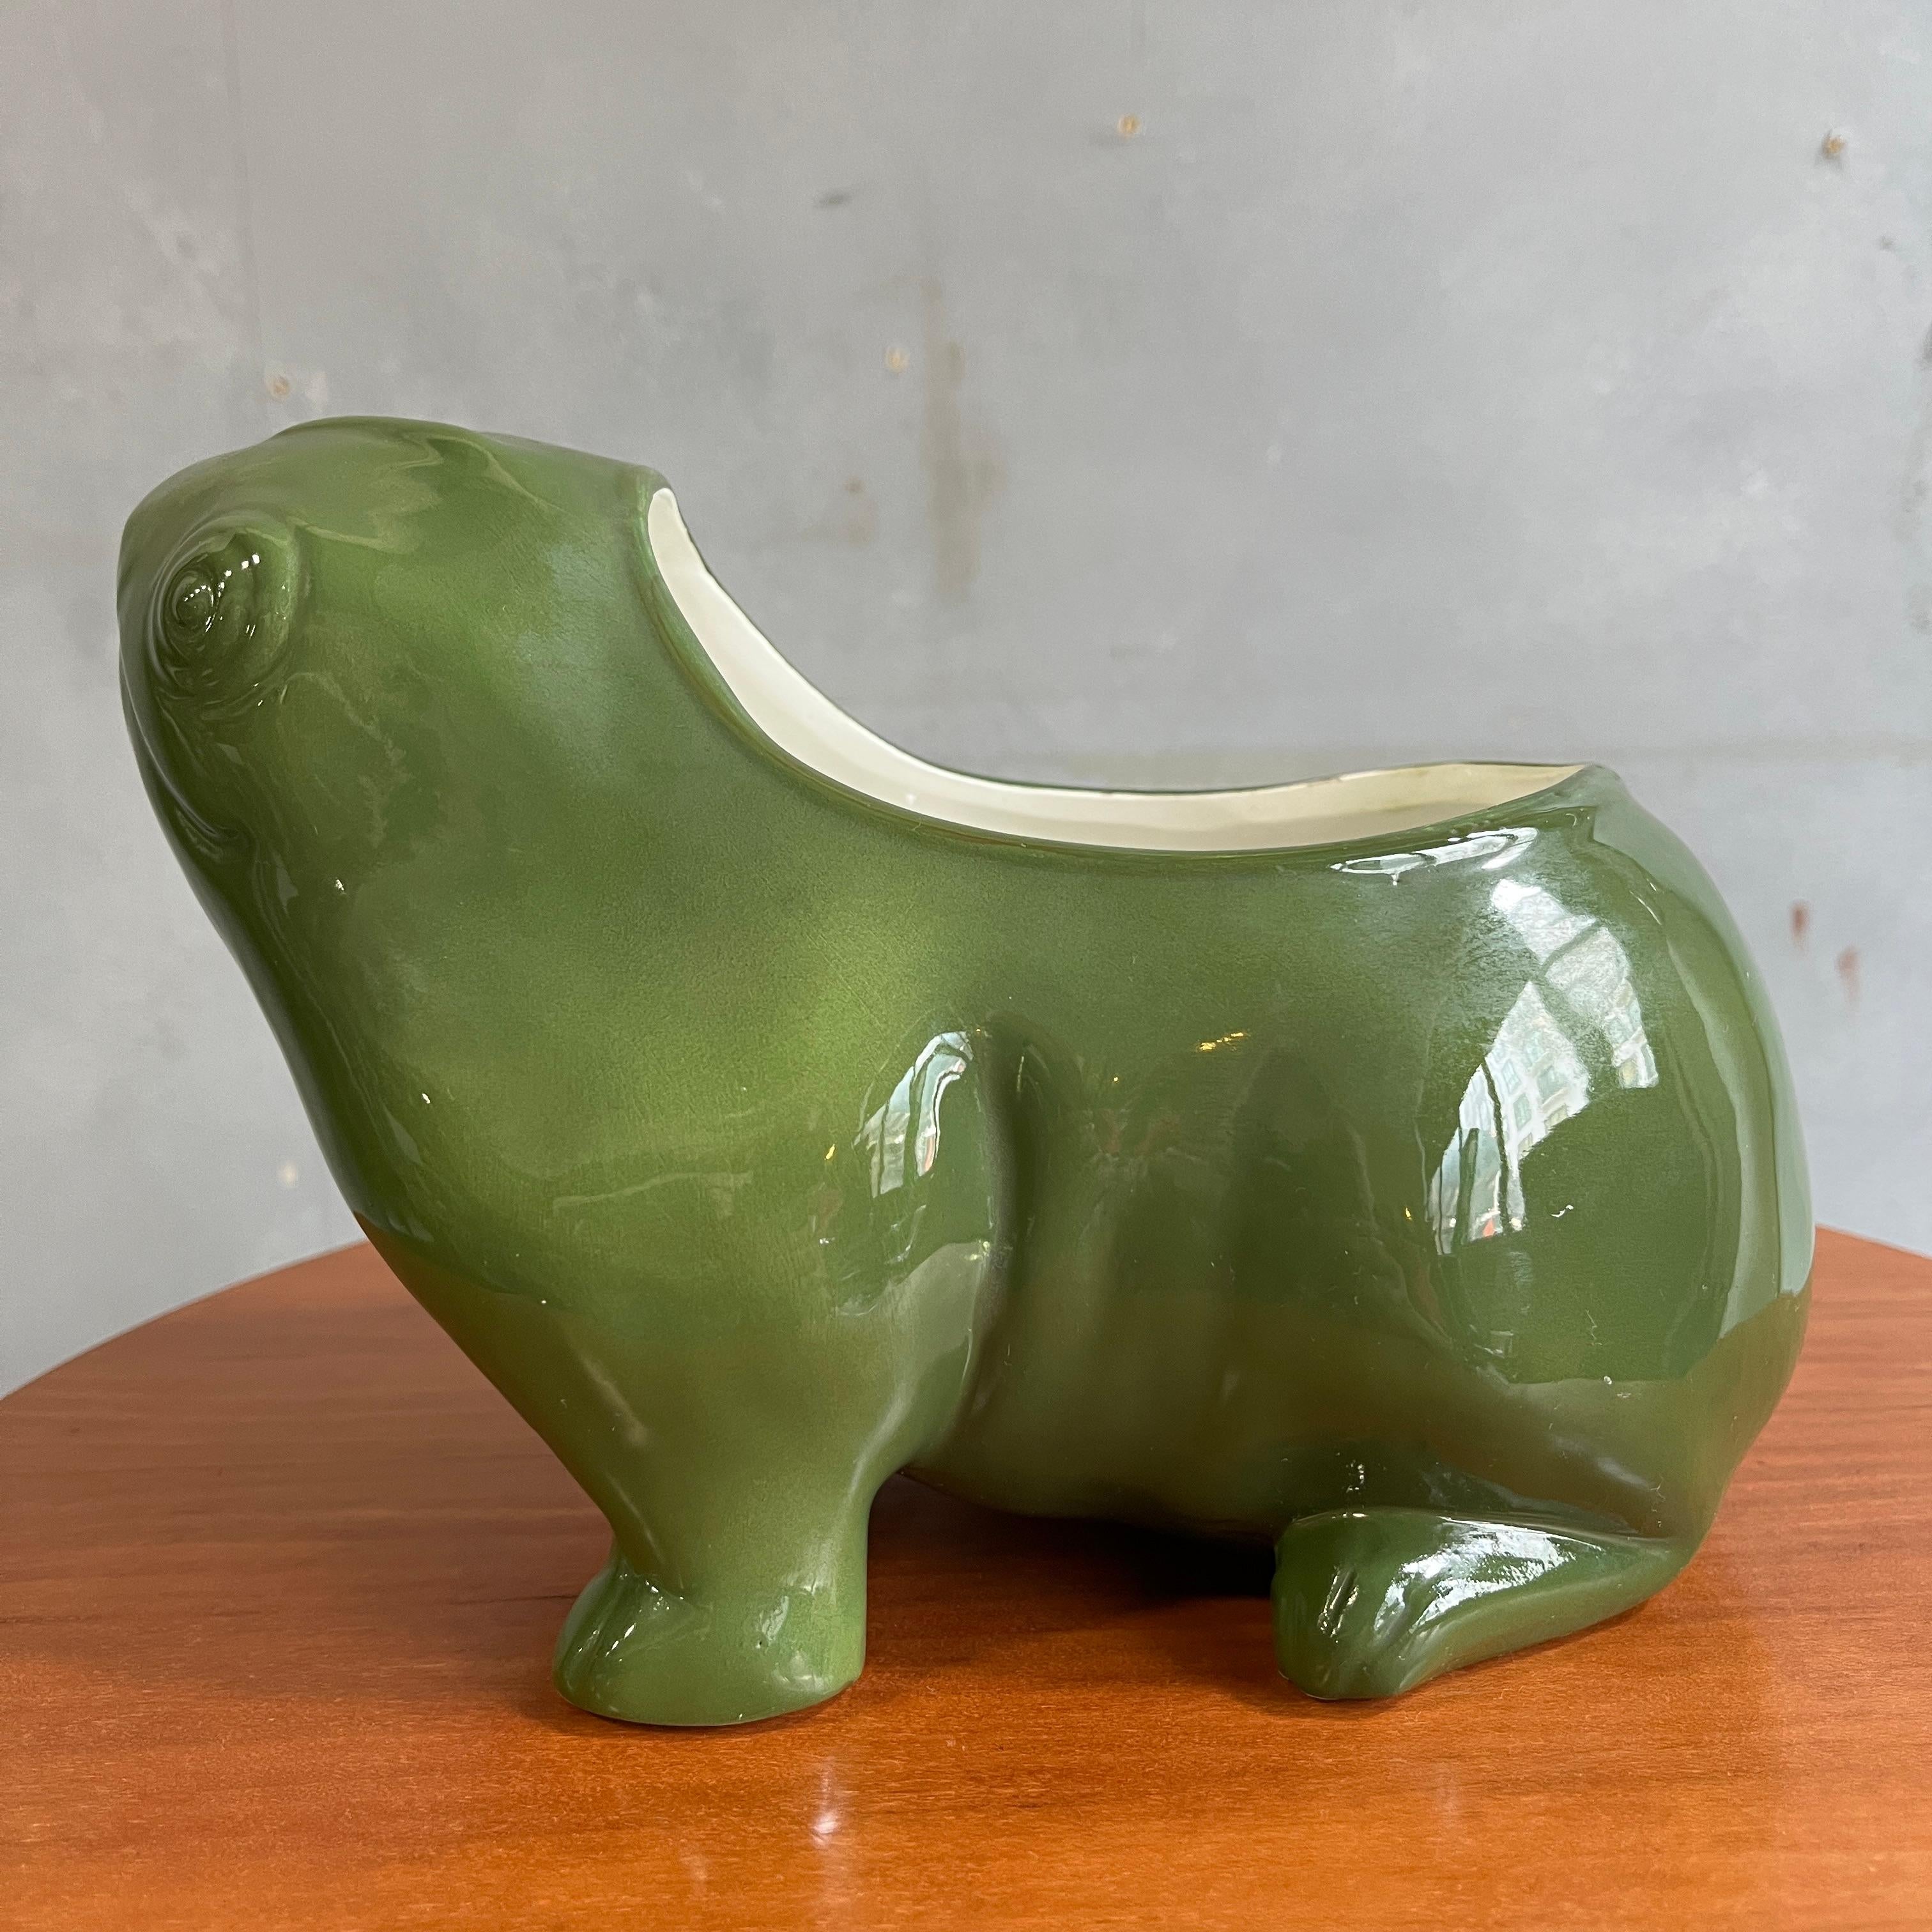 Adorable glazed green porcelain ceramic frog and flower pot / planter retailed by Tiffany. We have found no other examples. Has not been used and like new. Made in Italy model 405.